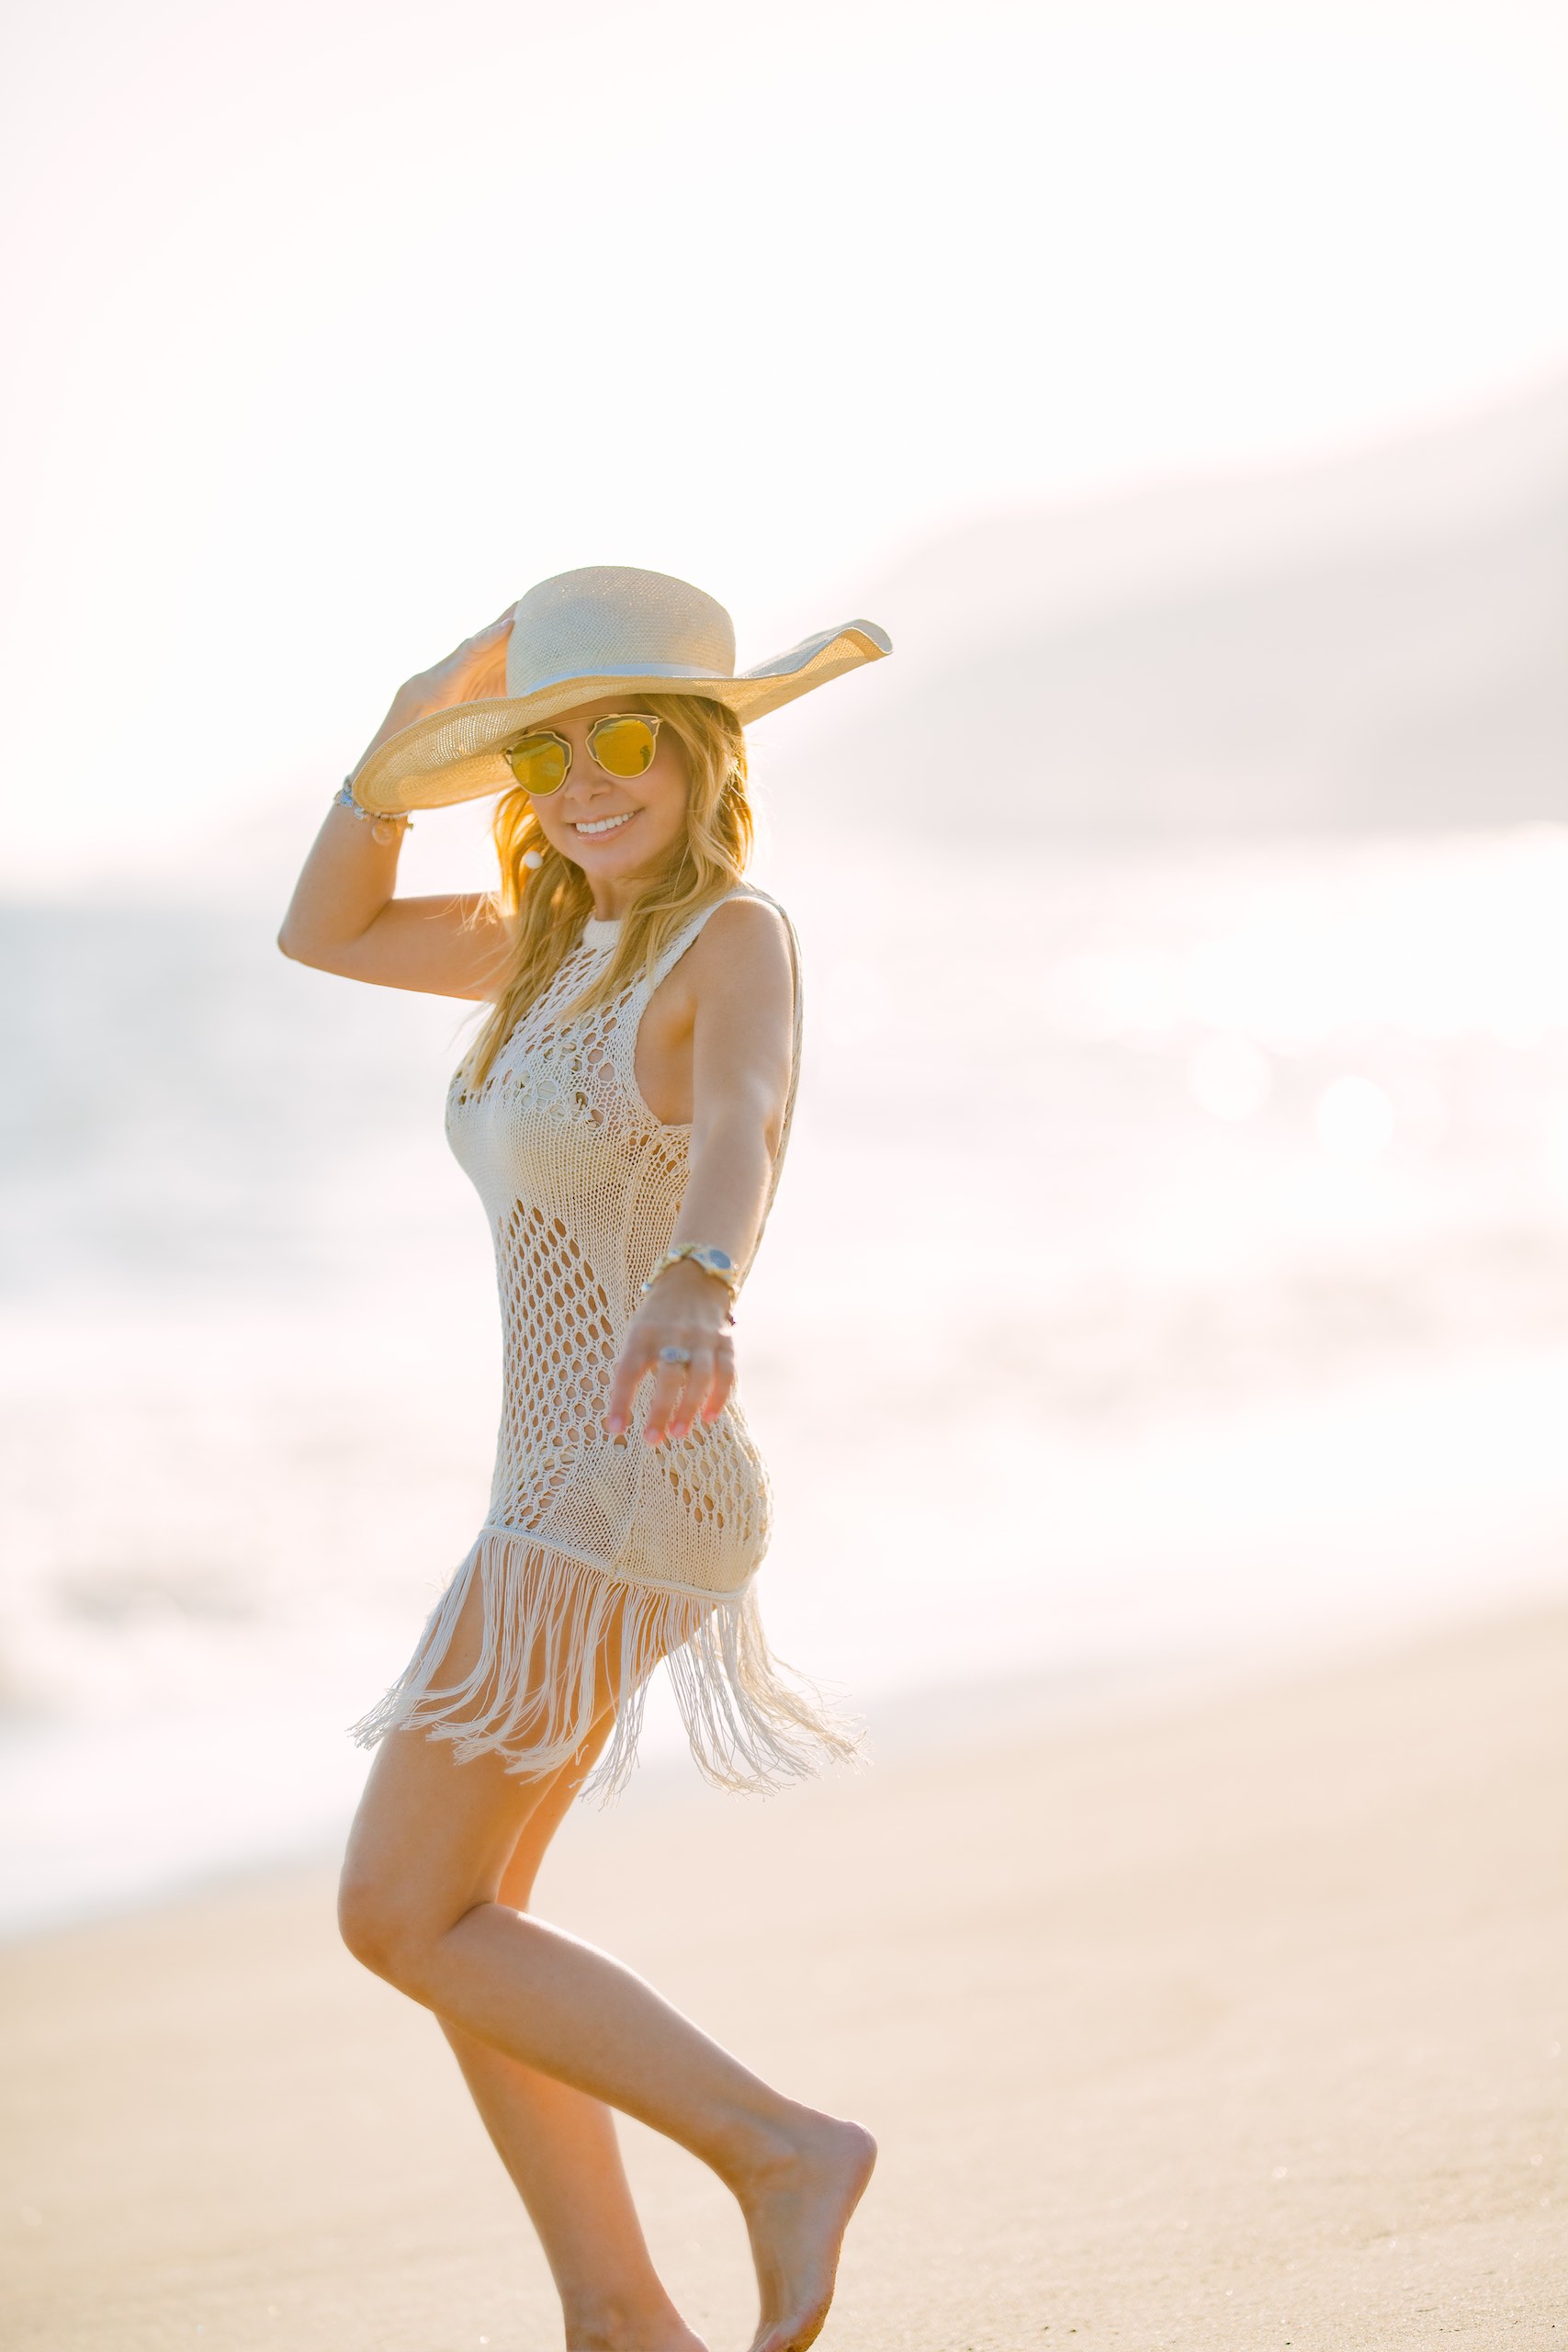 IU C&I Studios Portfolio Peretti Italy Woman with long blond hair wearing a knitted white dress and a beige hat smiling for the camera on a beach barefoot